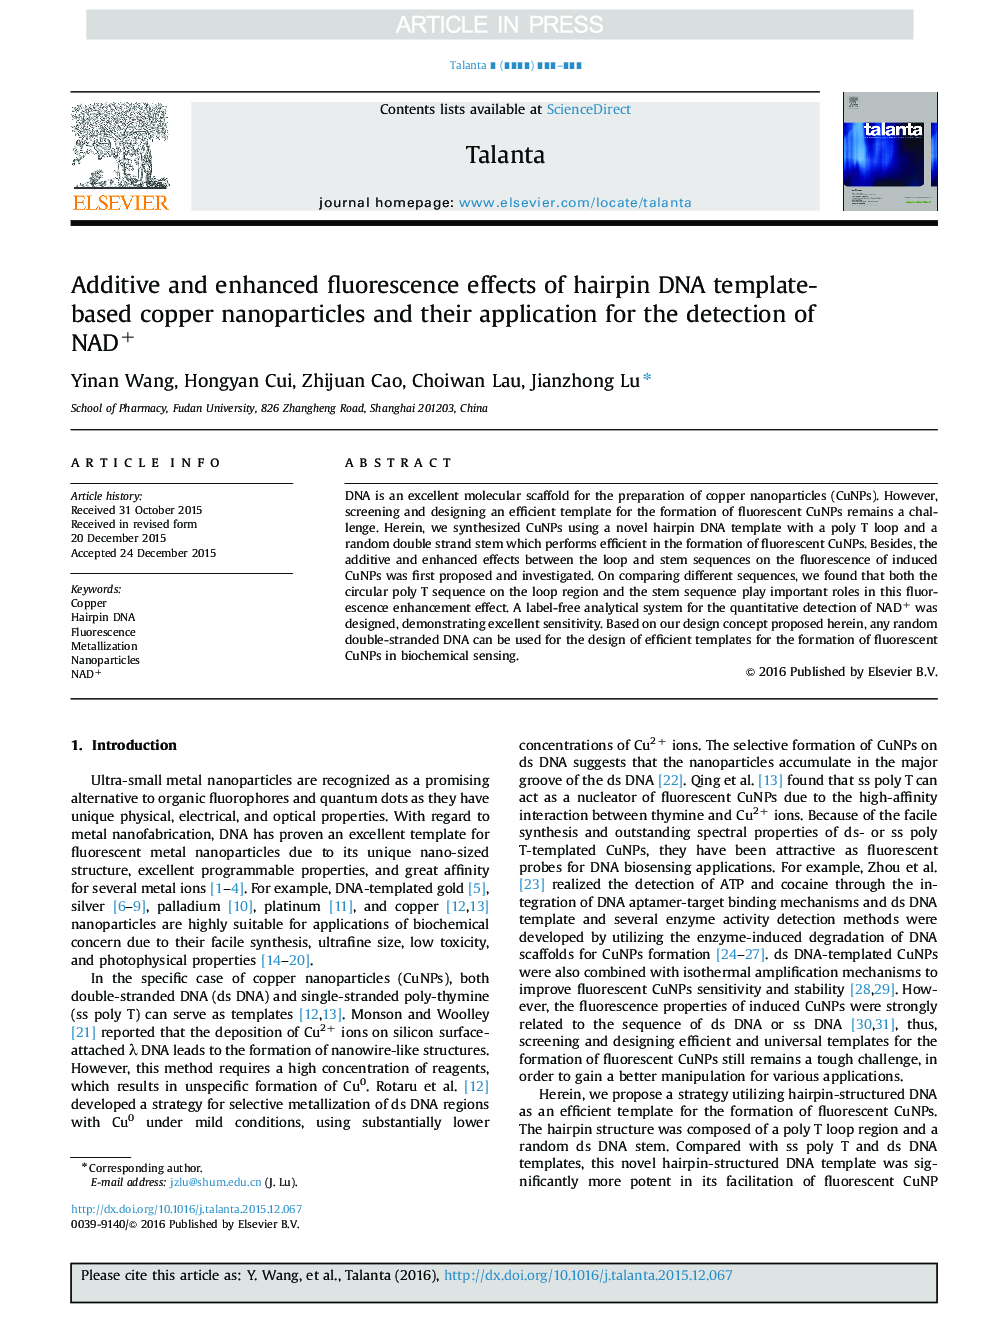 Additive and enhanced fluorescence effects of hairpin DNA template-based copper nanoparticles and their application for the detection of NAD+